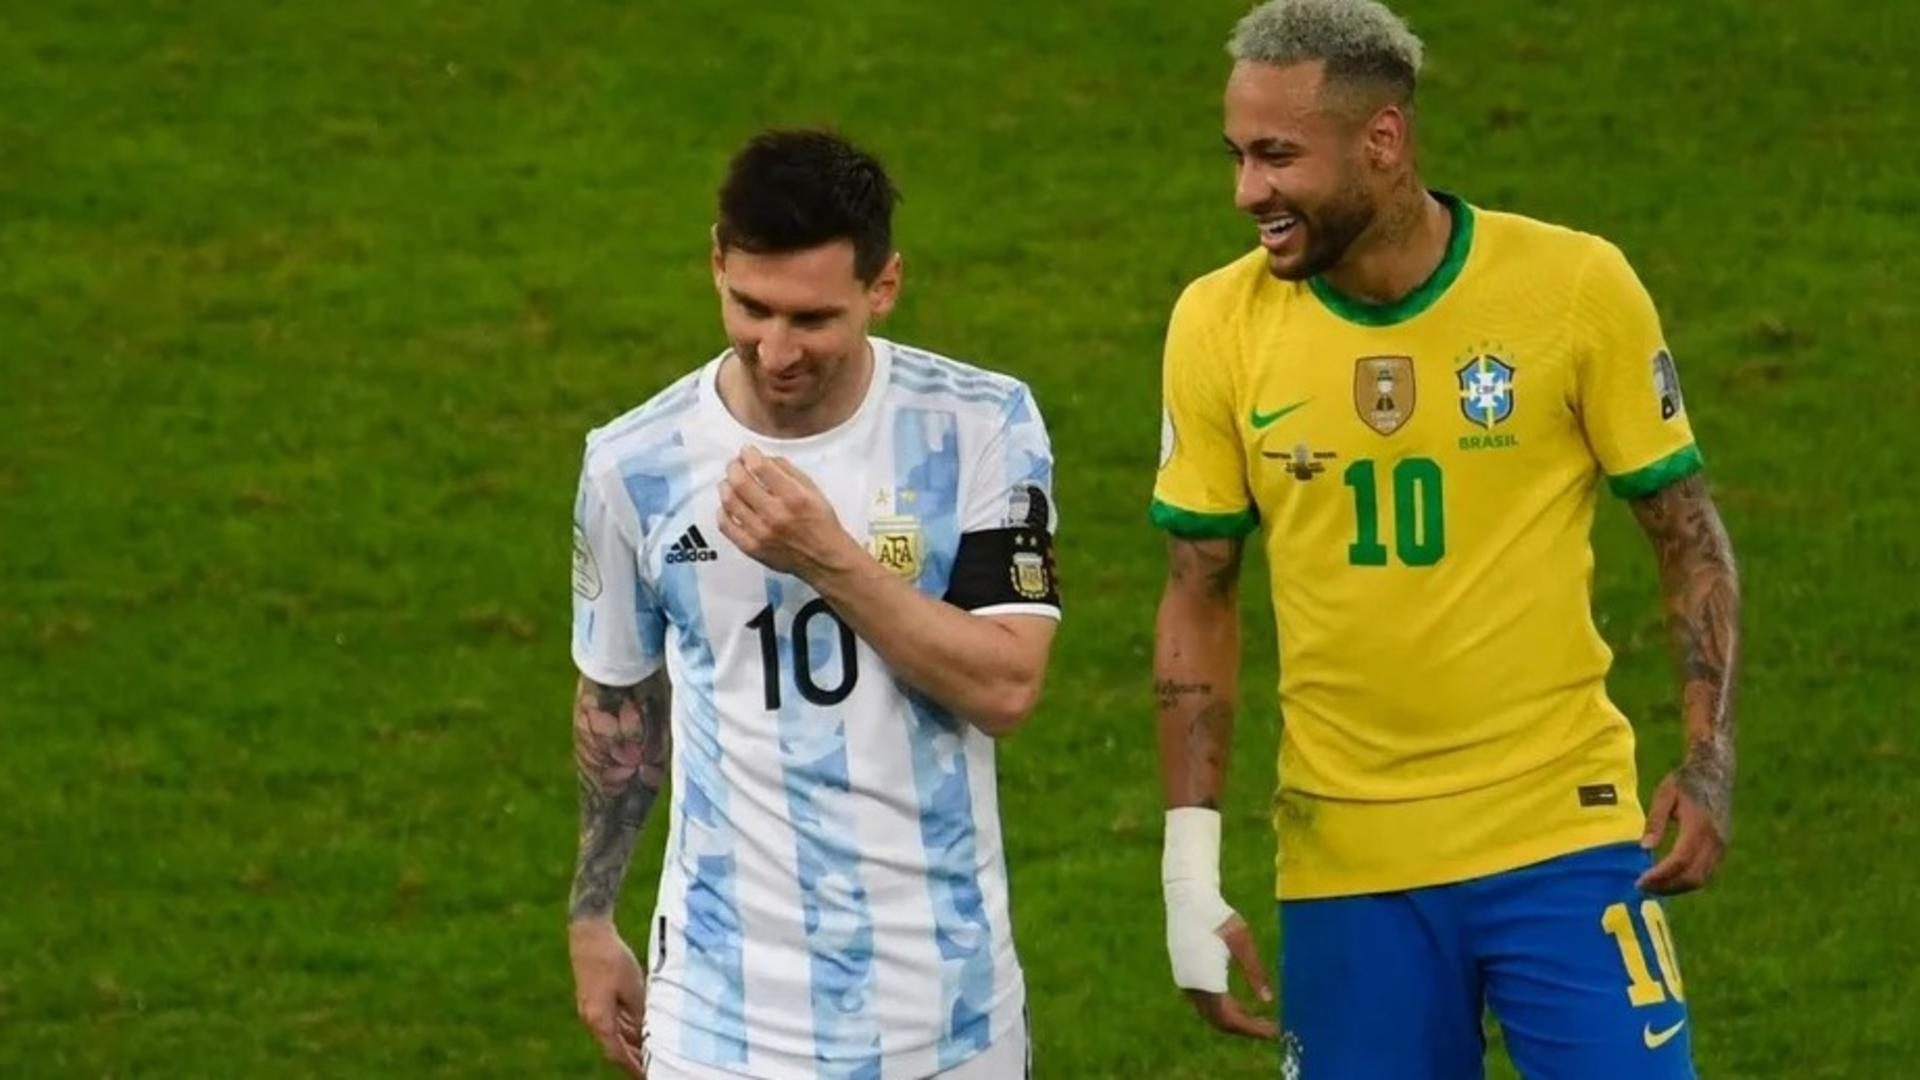 Messi vs. Ronaldo at World Cup: Goals, stats, records hint at who is the  best player on world stage